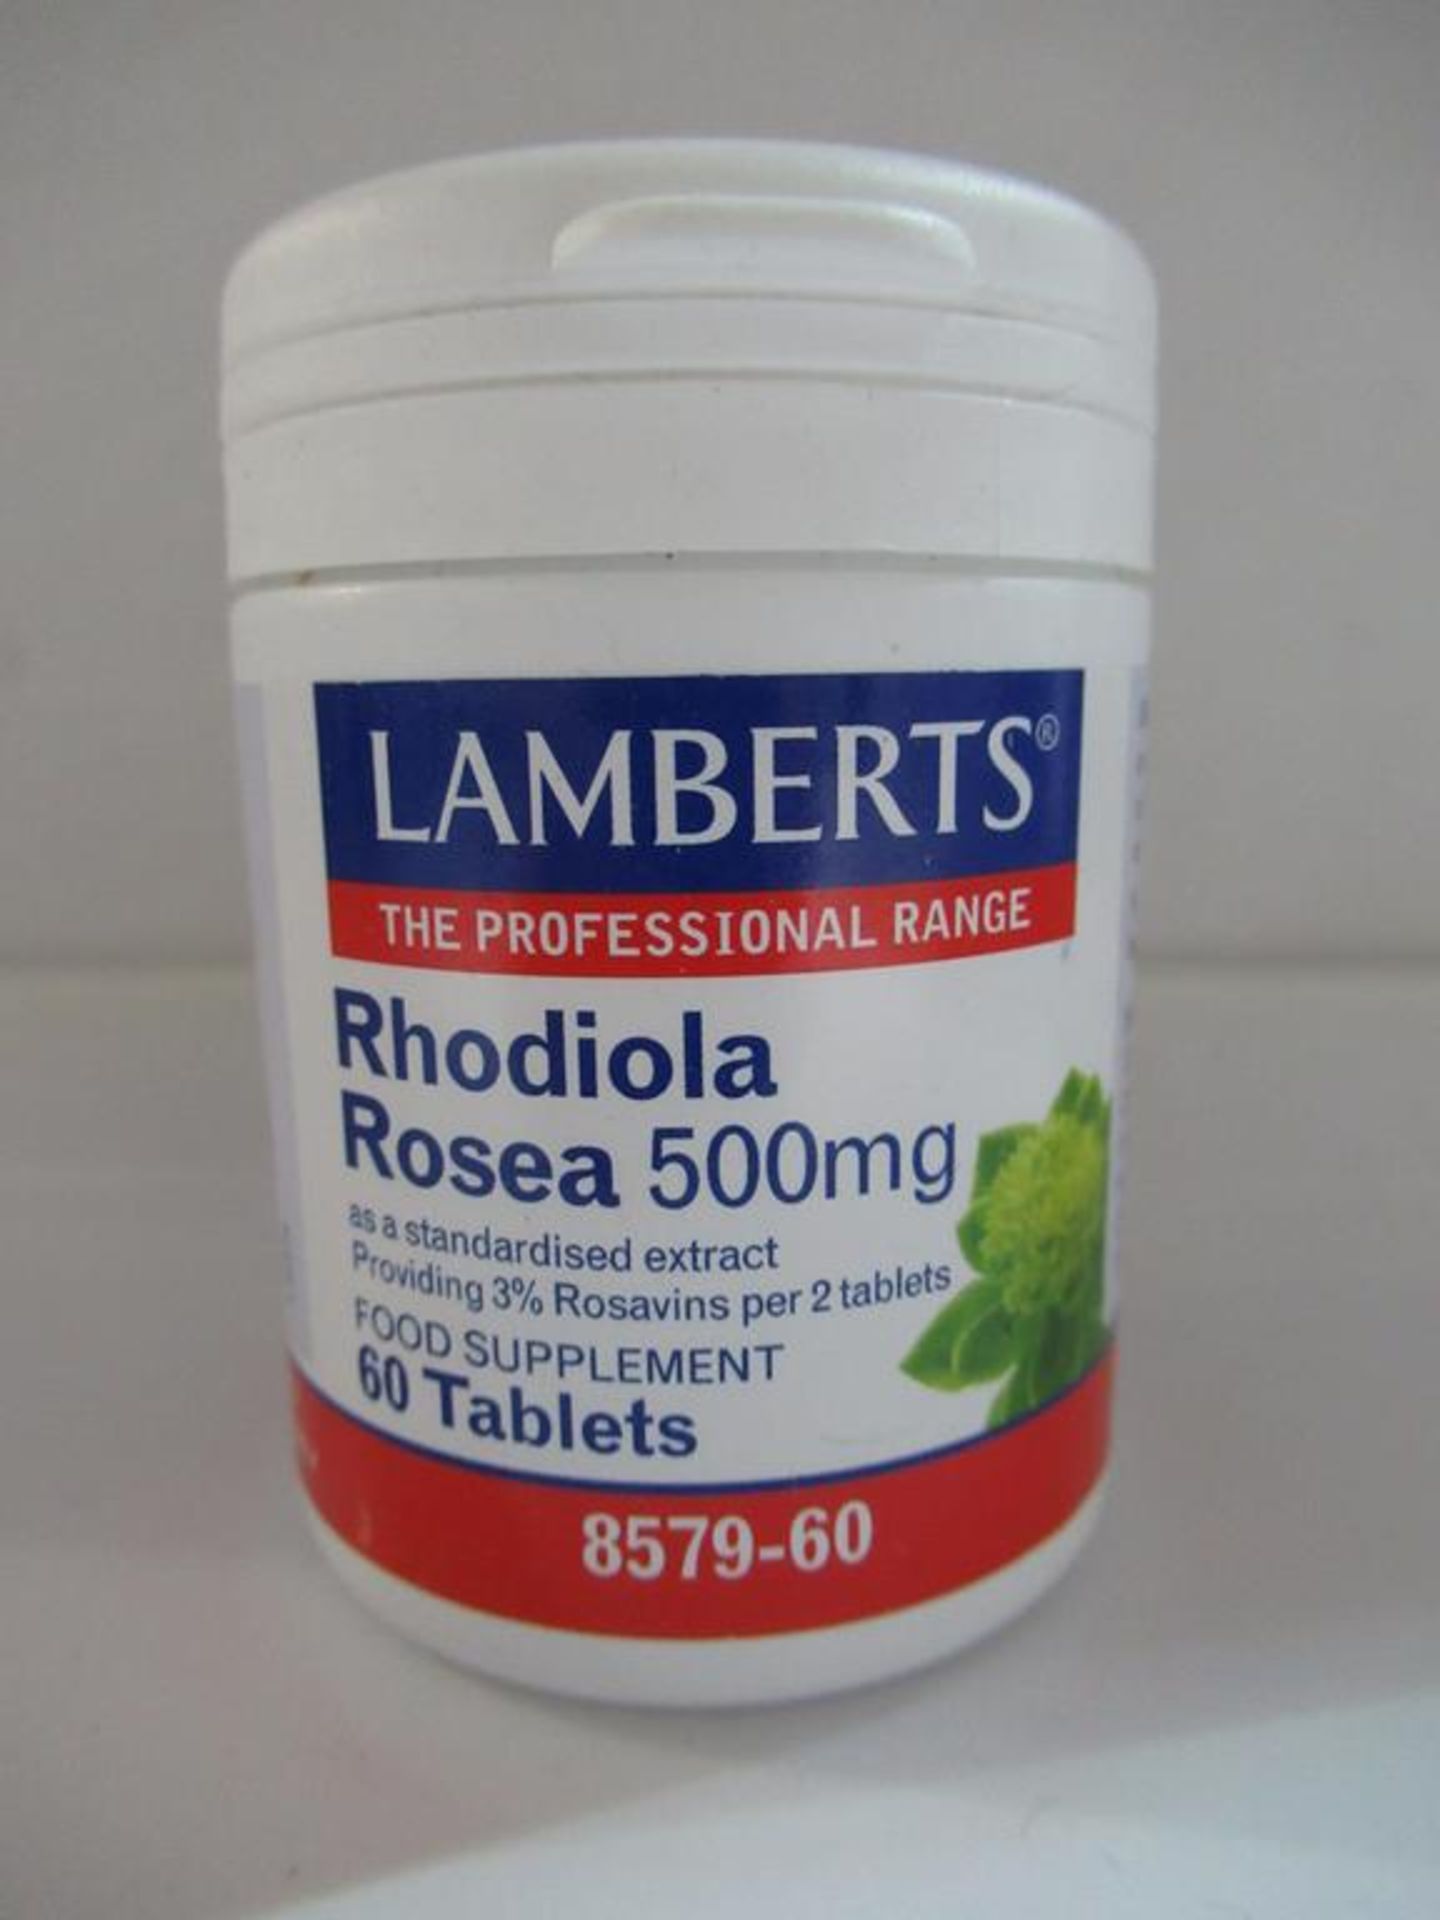 10 x assorted 'Lamberts' tablets/capsules of supplements including Taurine, Thiamine, Silica etc - Image 5 of 8